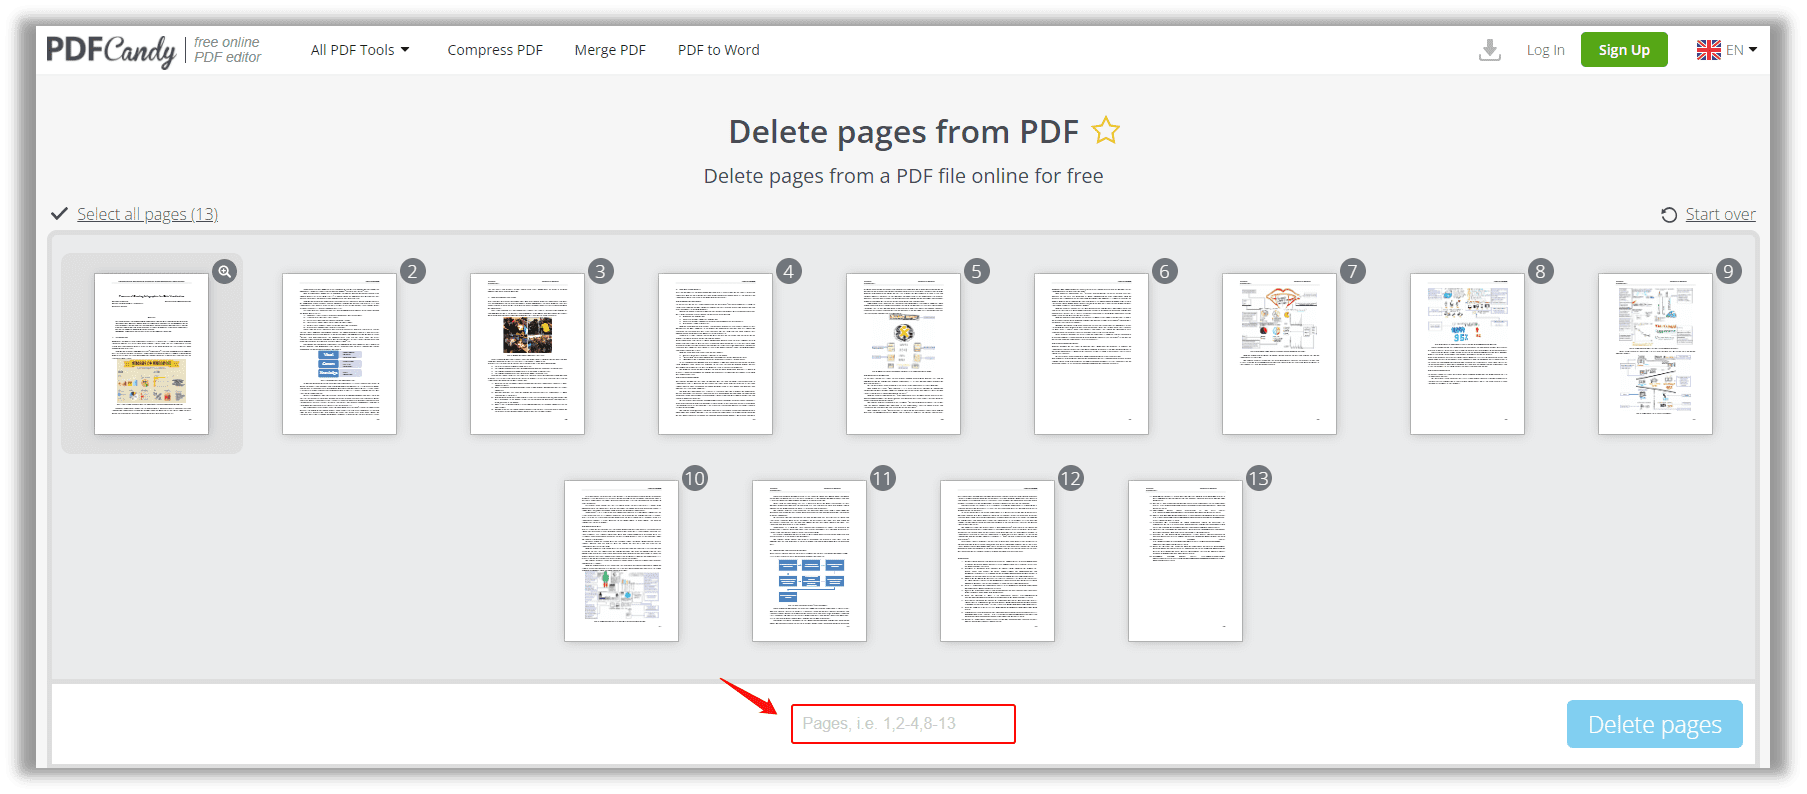 comment-supprimer-pages-pdf-swifdoo-pdf-pdfcandy-online